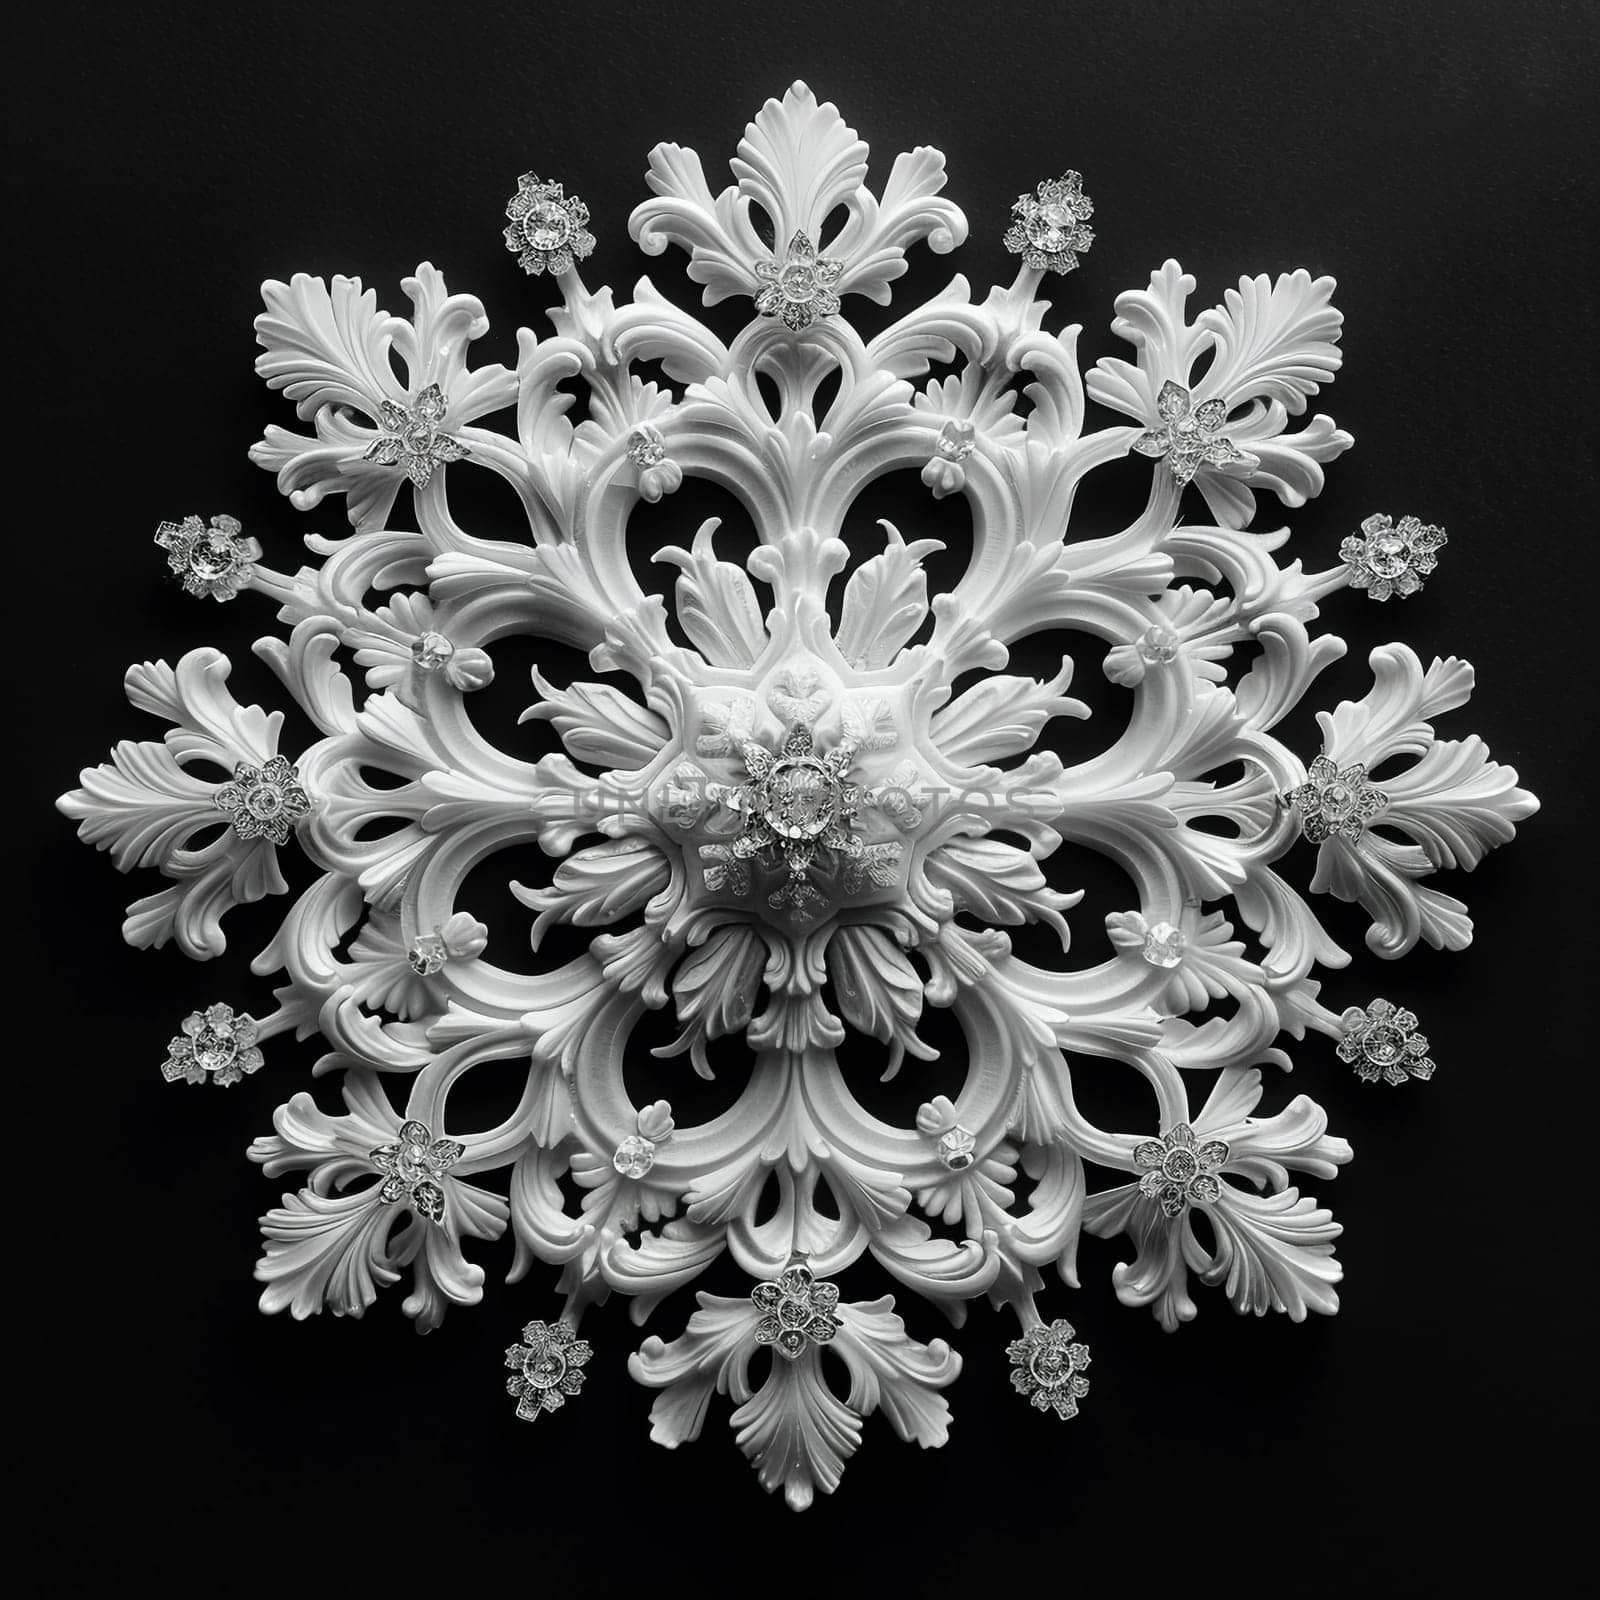 The intricate details of a snowflake, symbolizing uniqueness and winter.